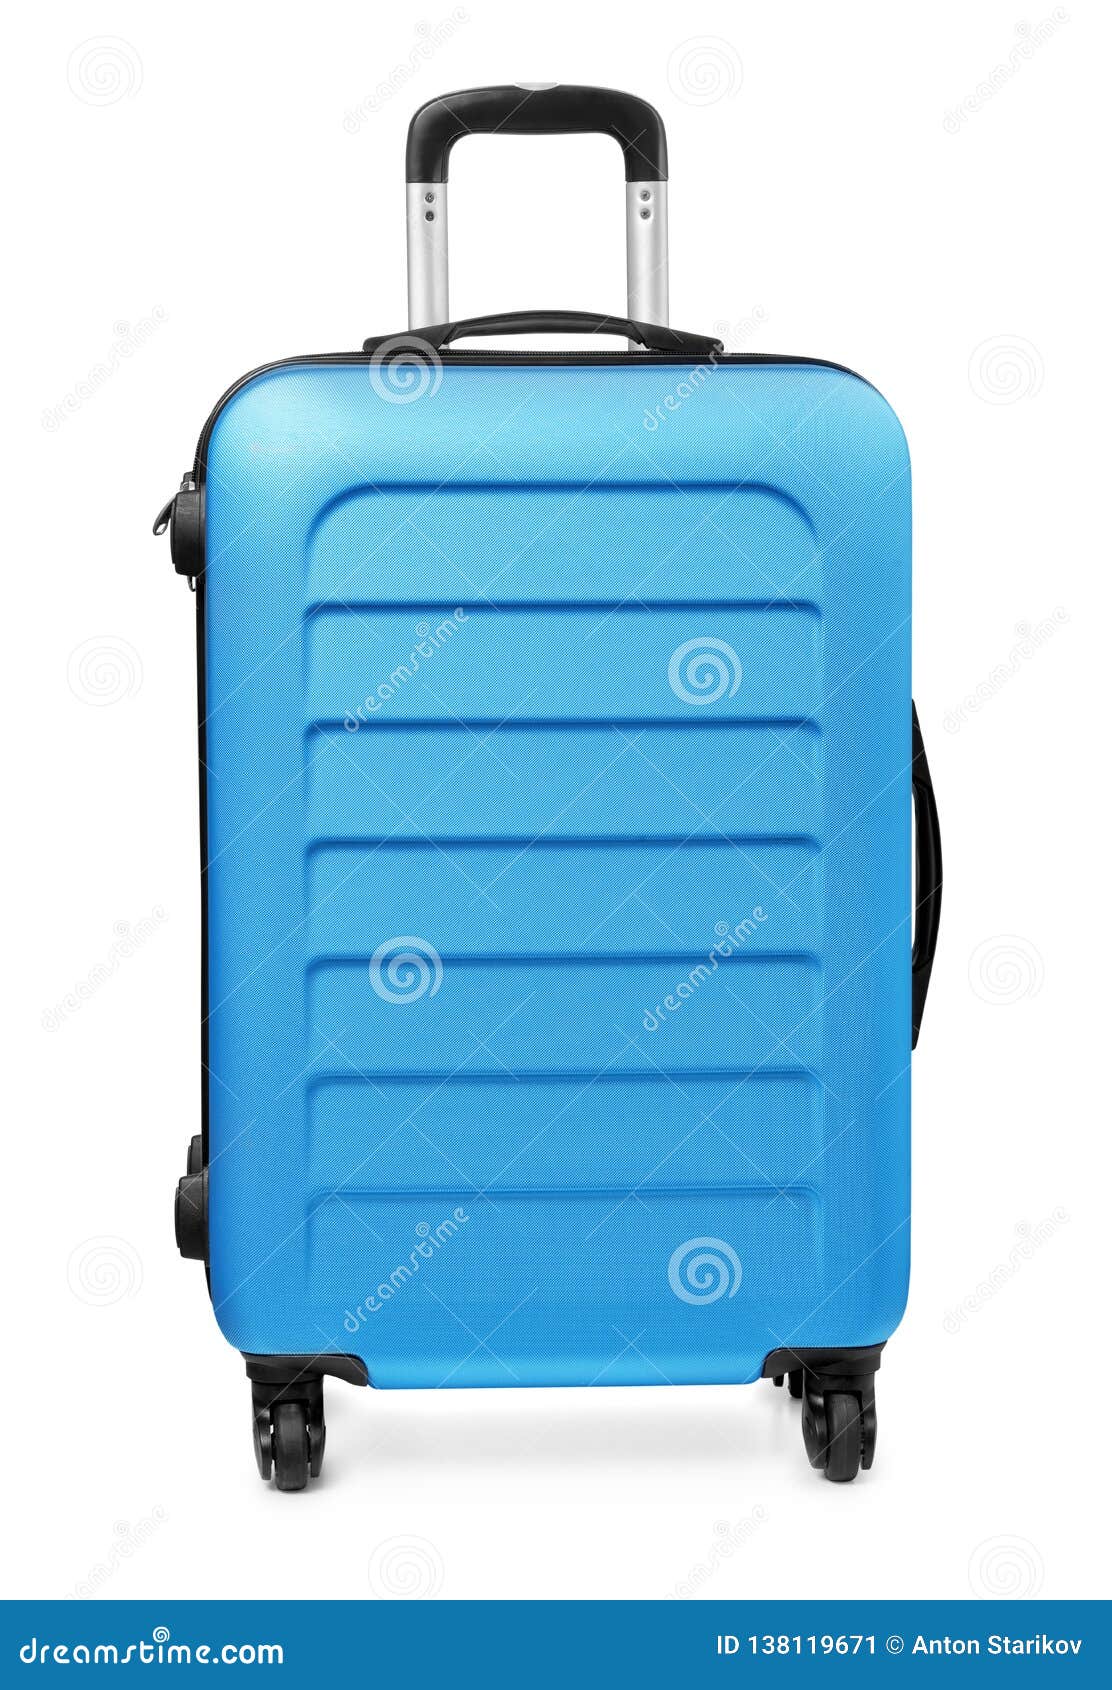 Front View of Blue Plastic Suitcase Stock Image - Image of cabin ...